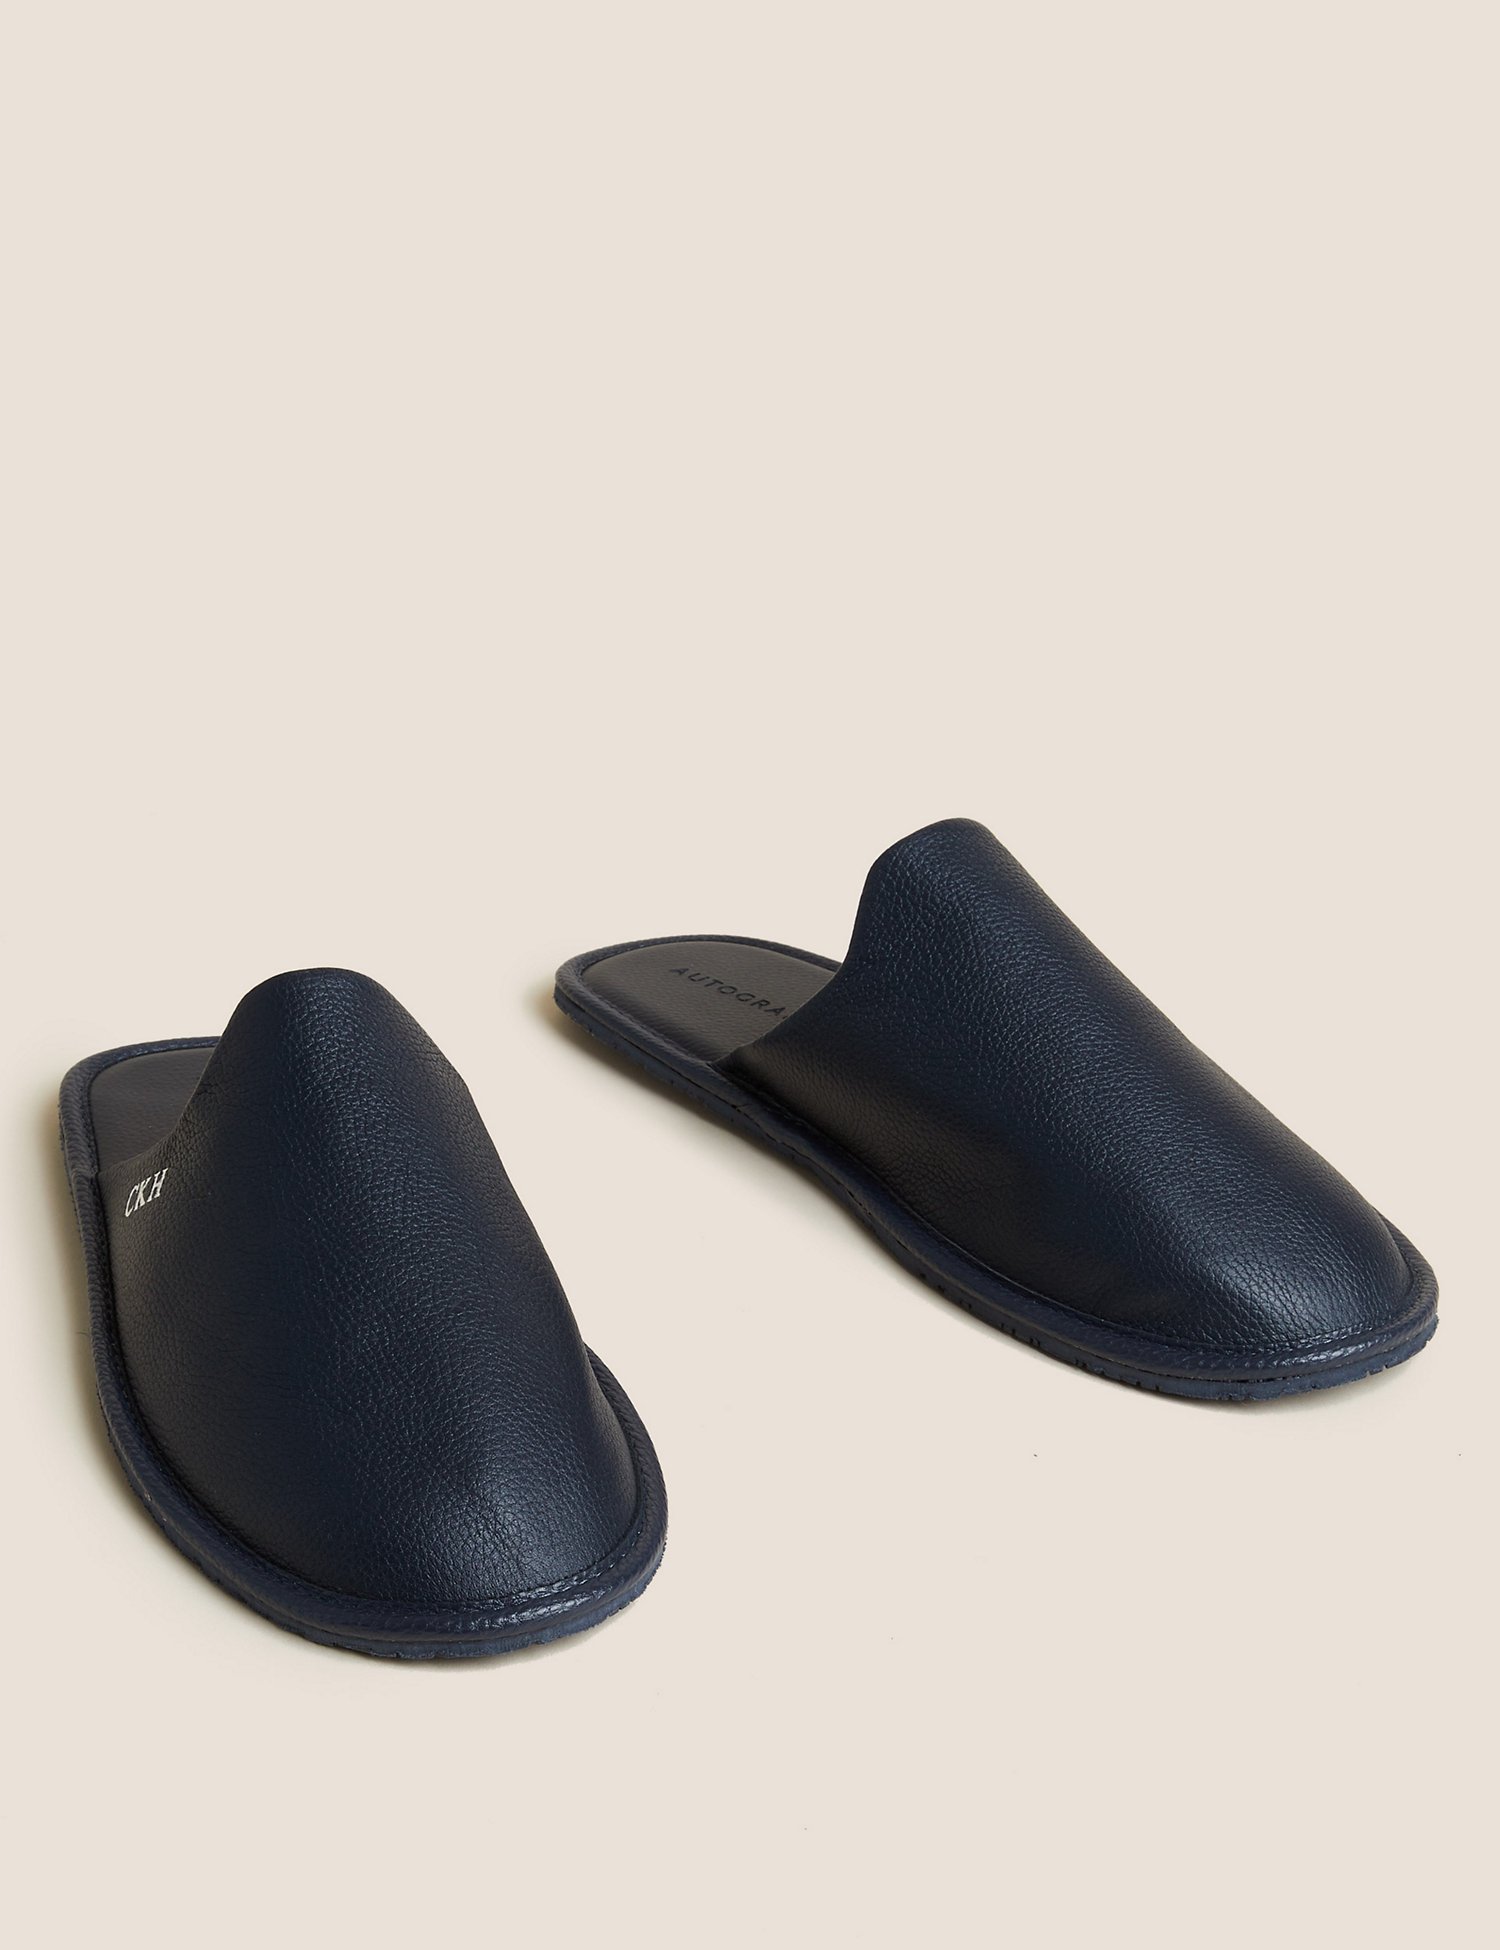 Luxurious Slippers - M&amp;S leather mule slippers - £45